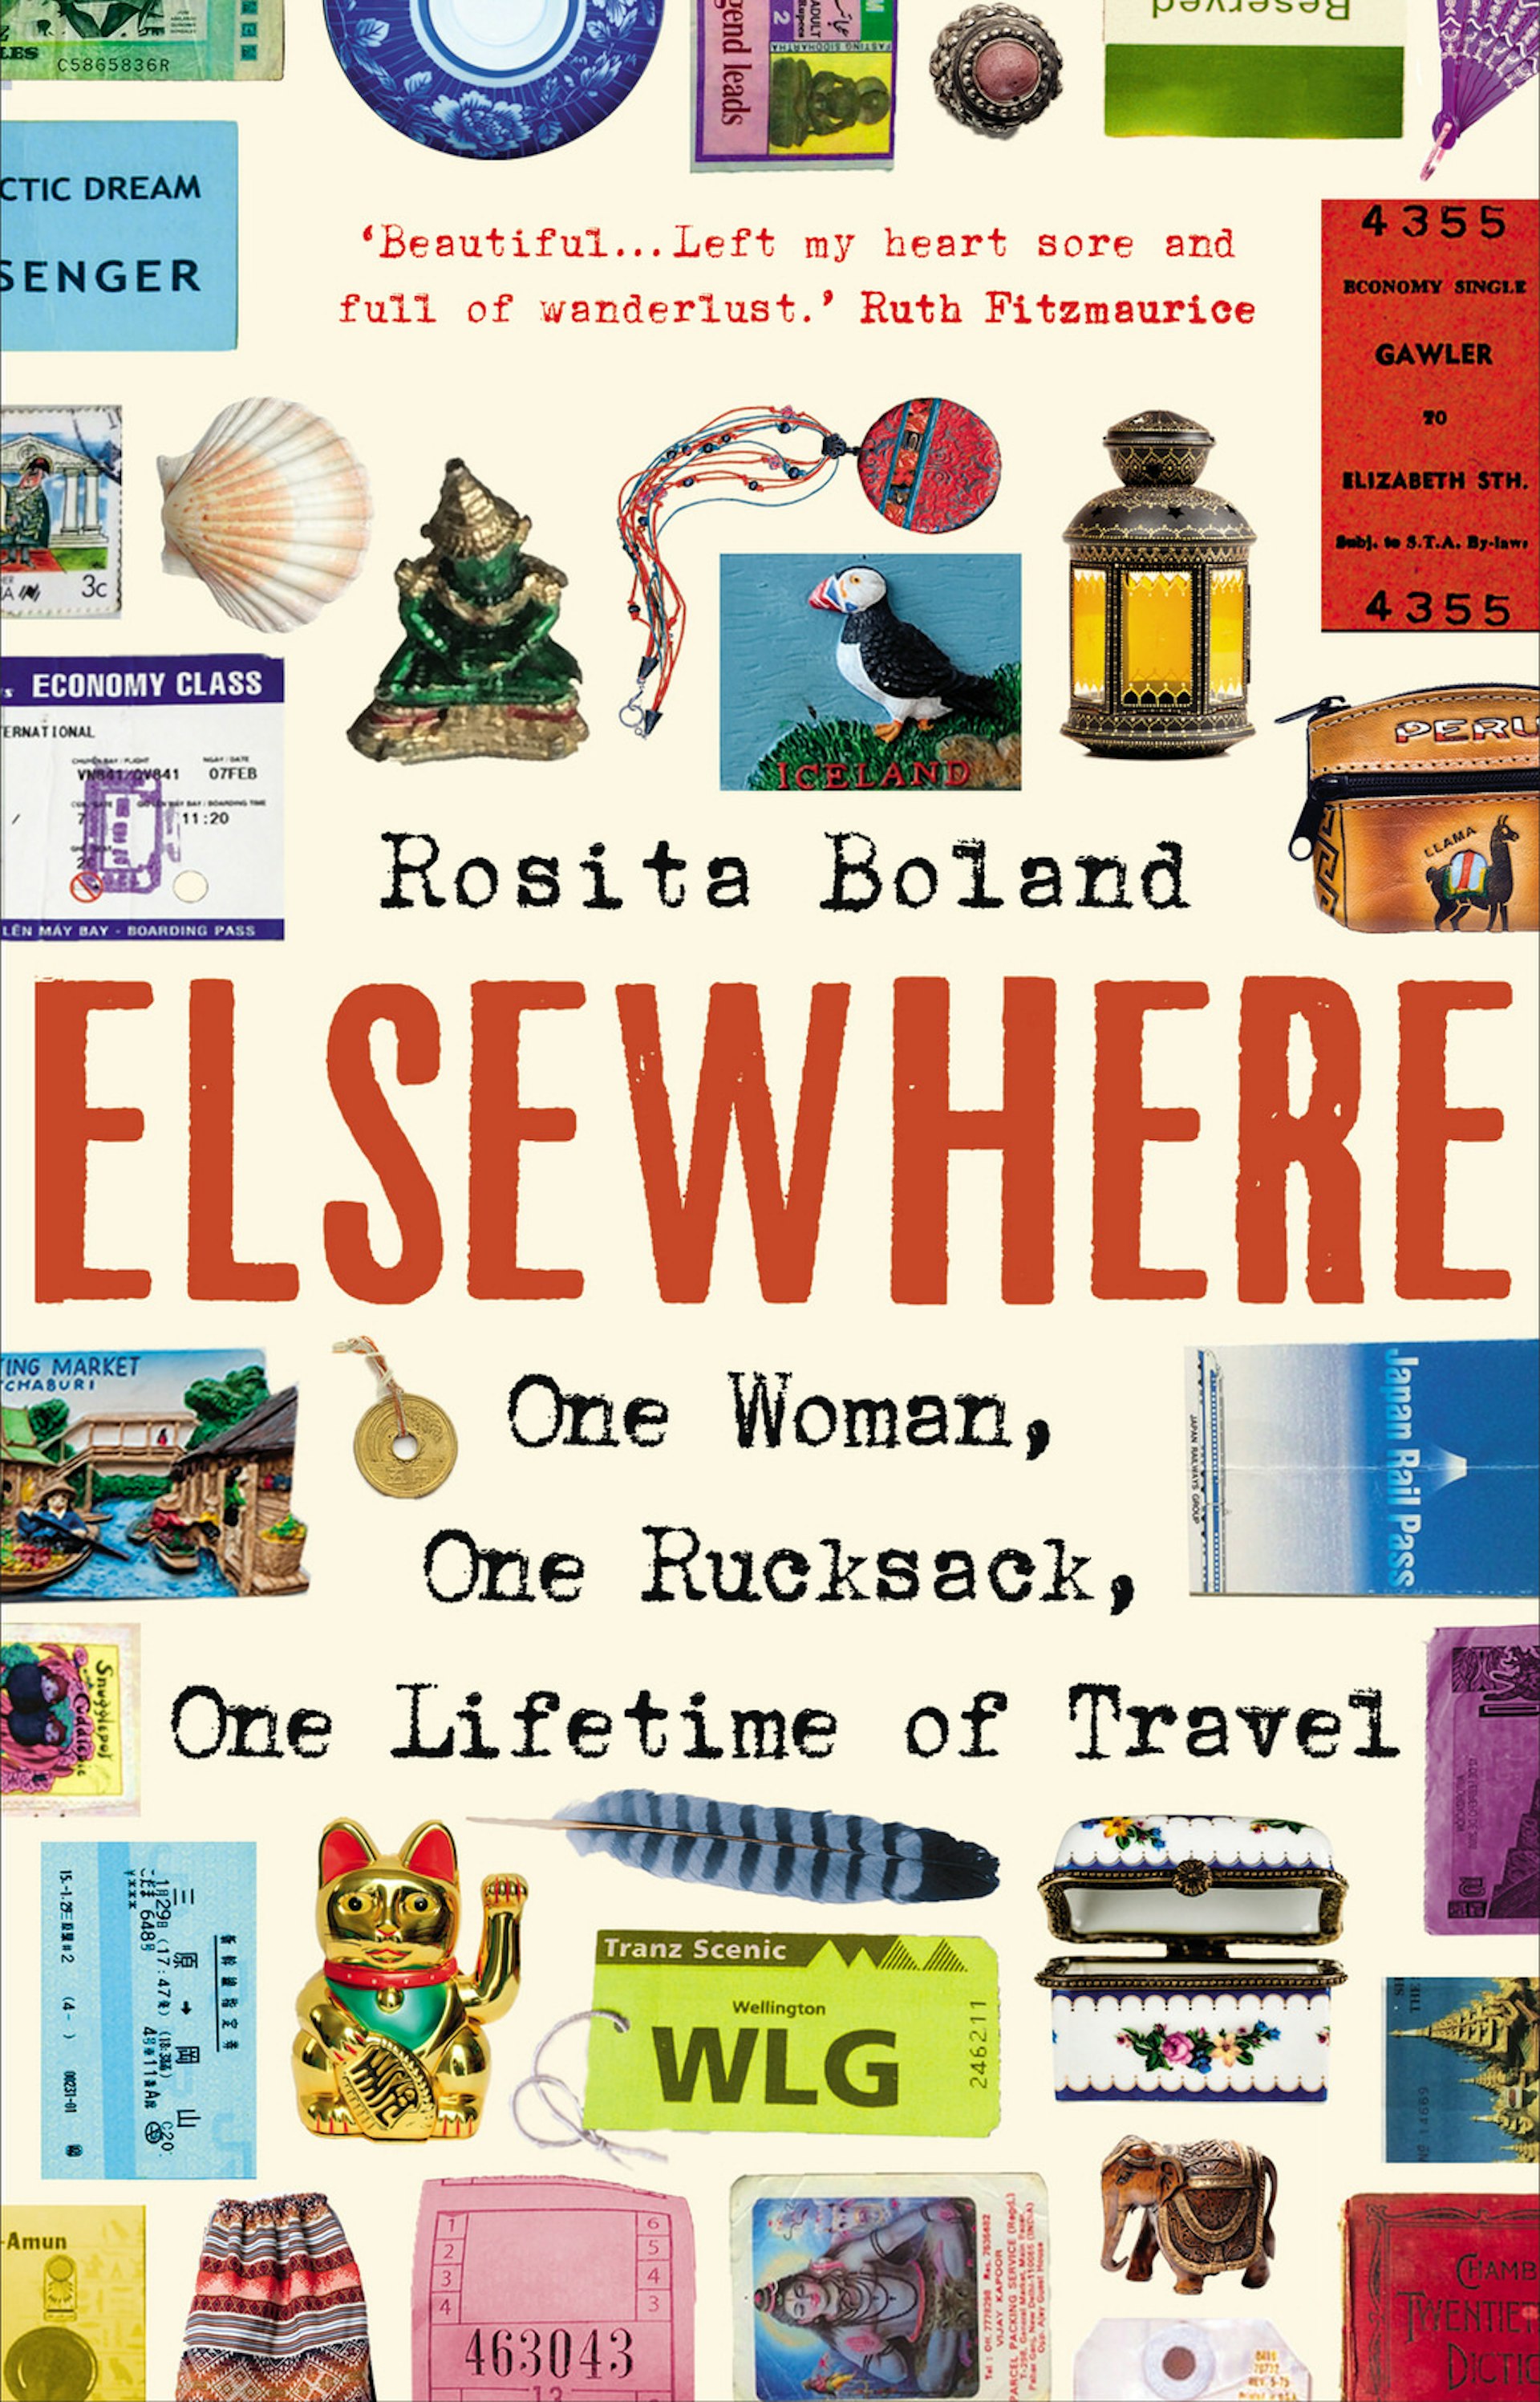 The jacket cover for Elsewhere by Rosita Boland. 